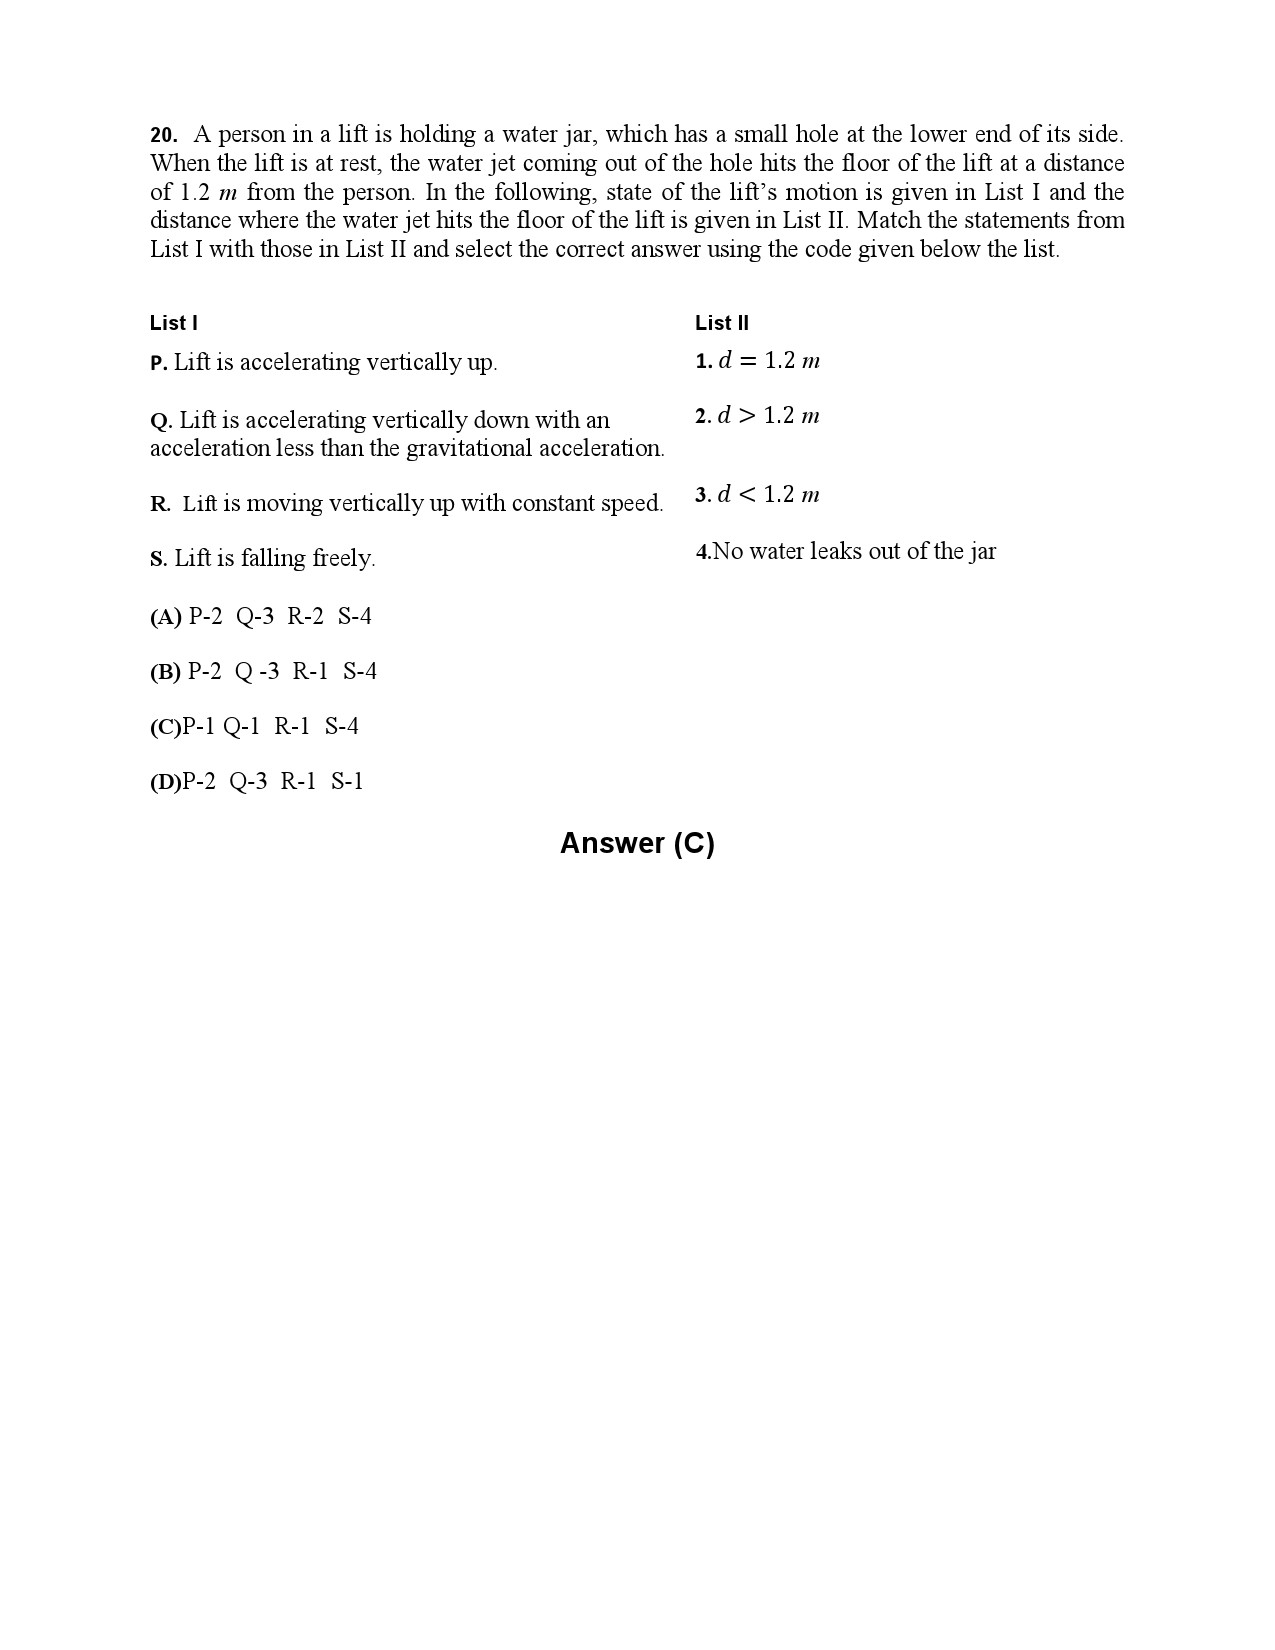 JEE Advanced Exam Question Paper 2014 Paper 2 Physics 12